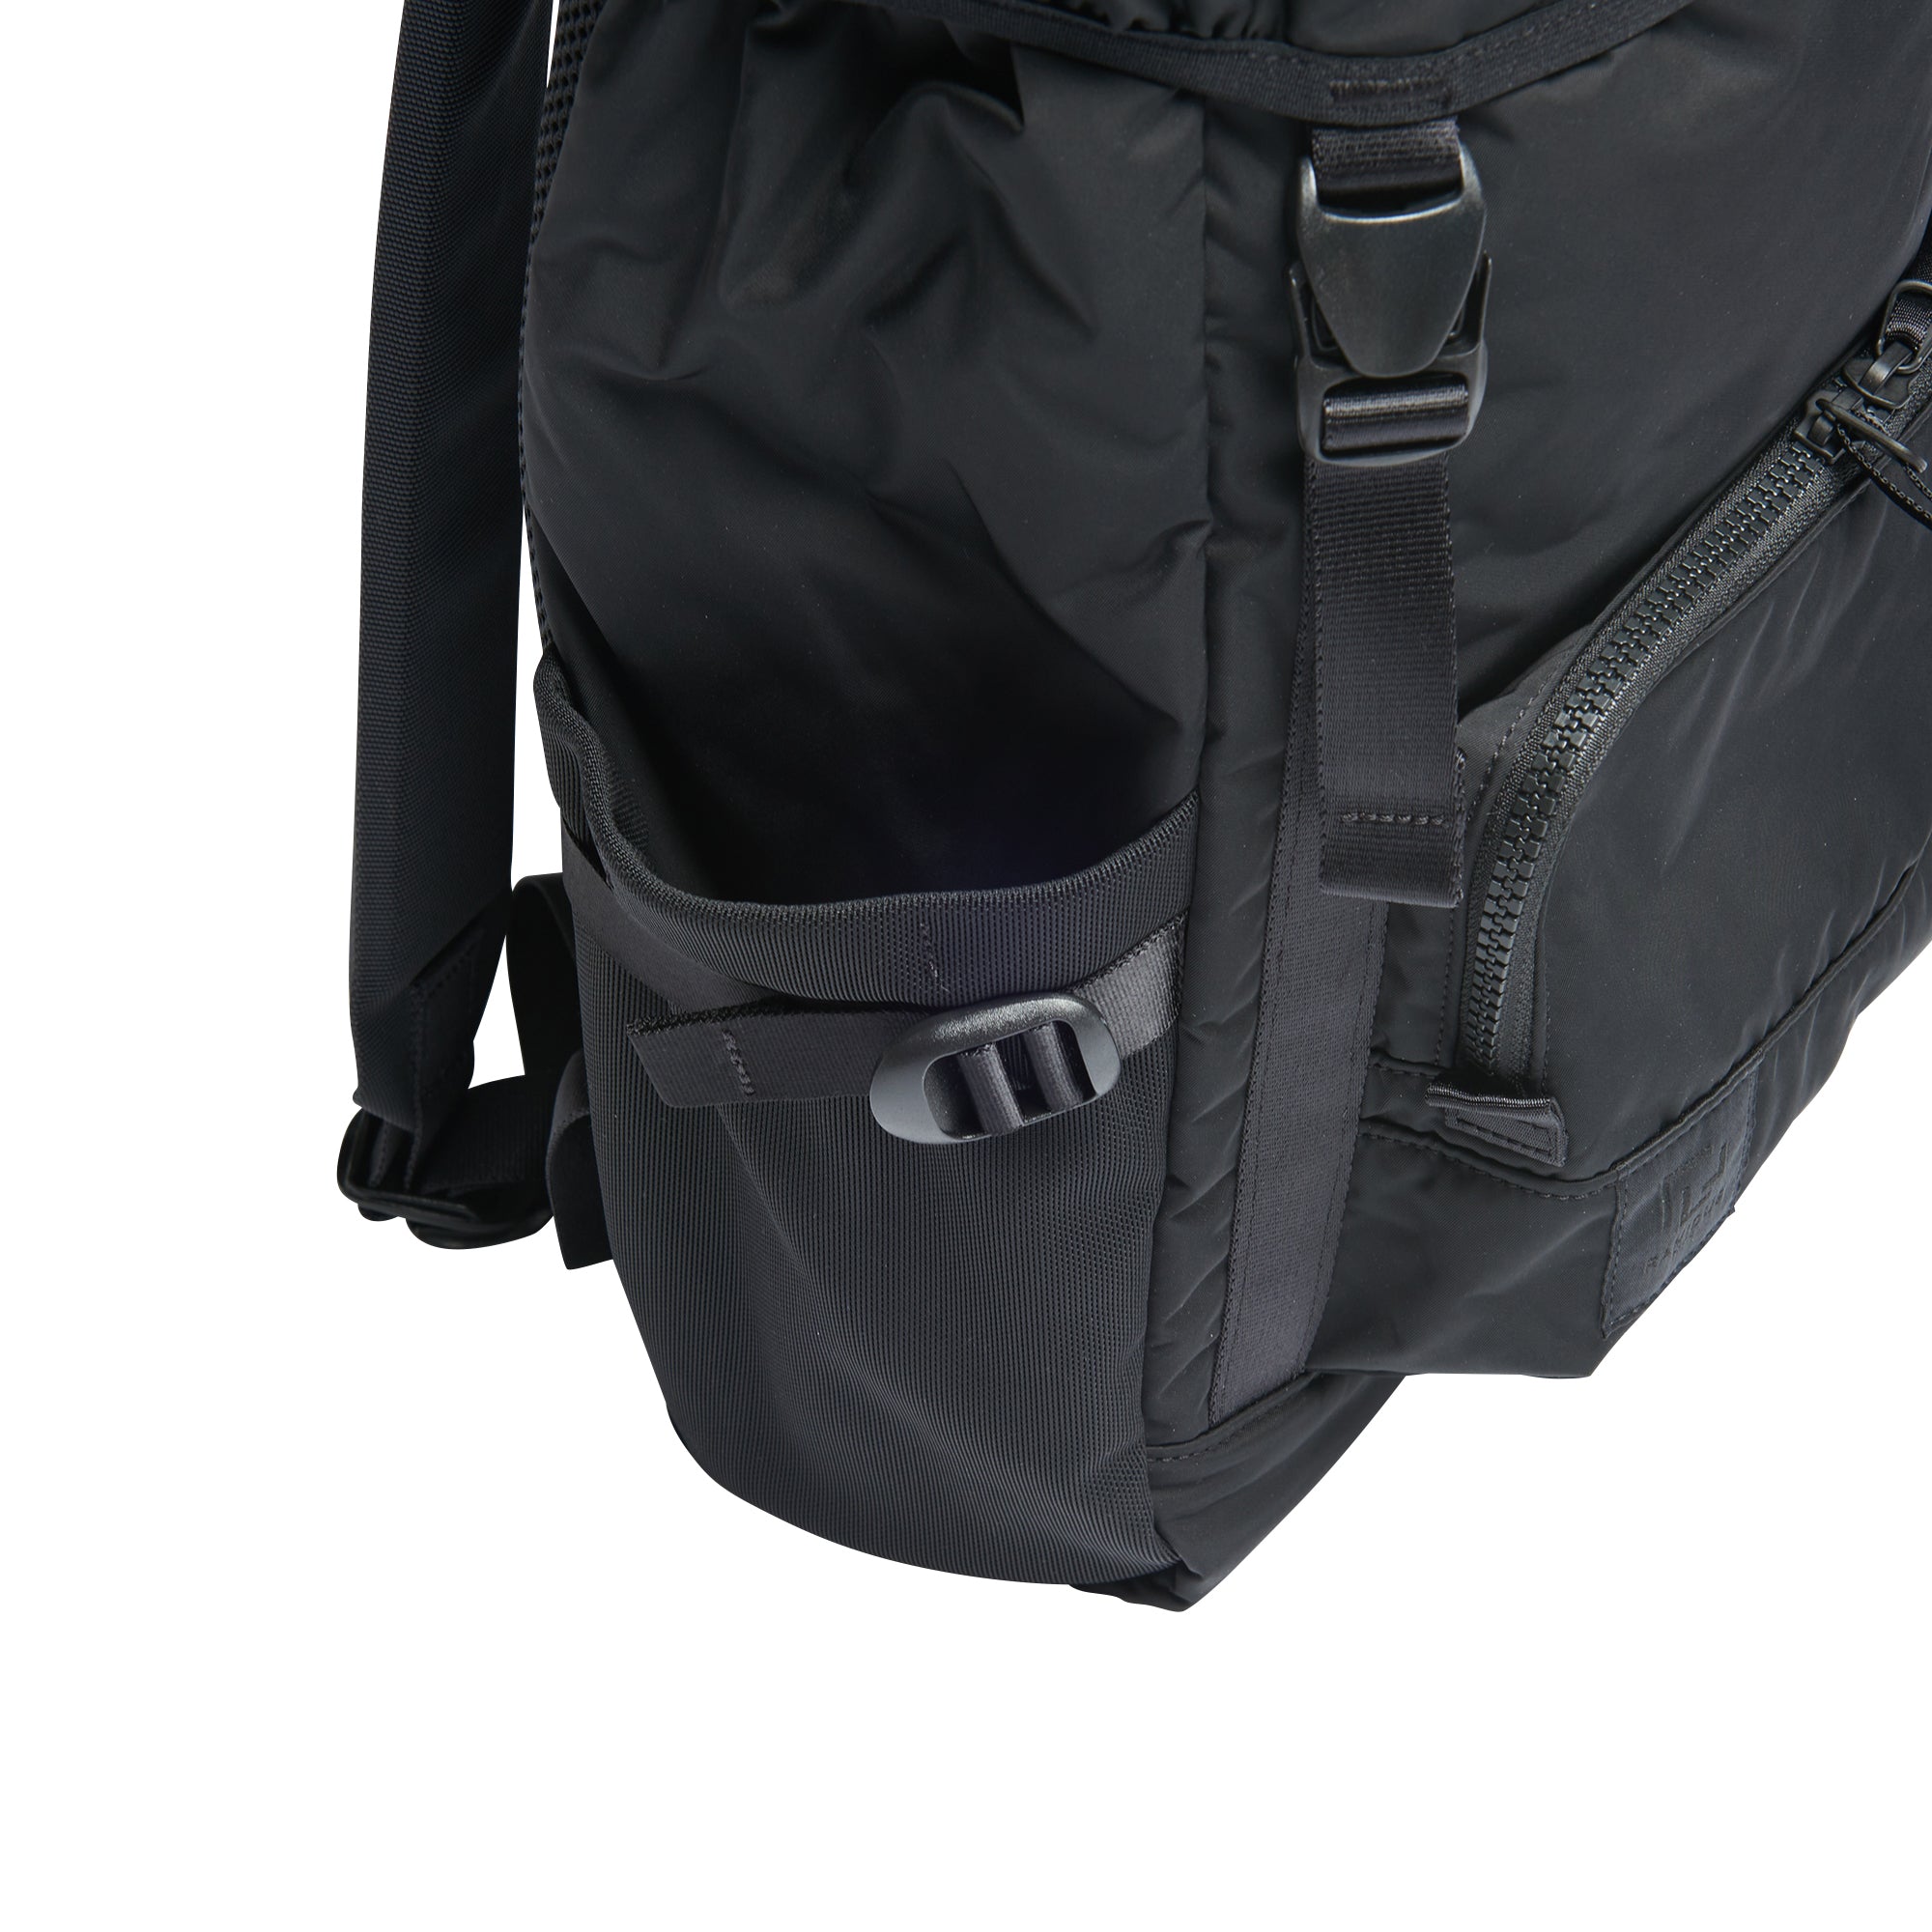 RAMIDUS / BLACK BEAUTY by fragment design BACKPACK（L）